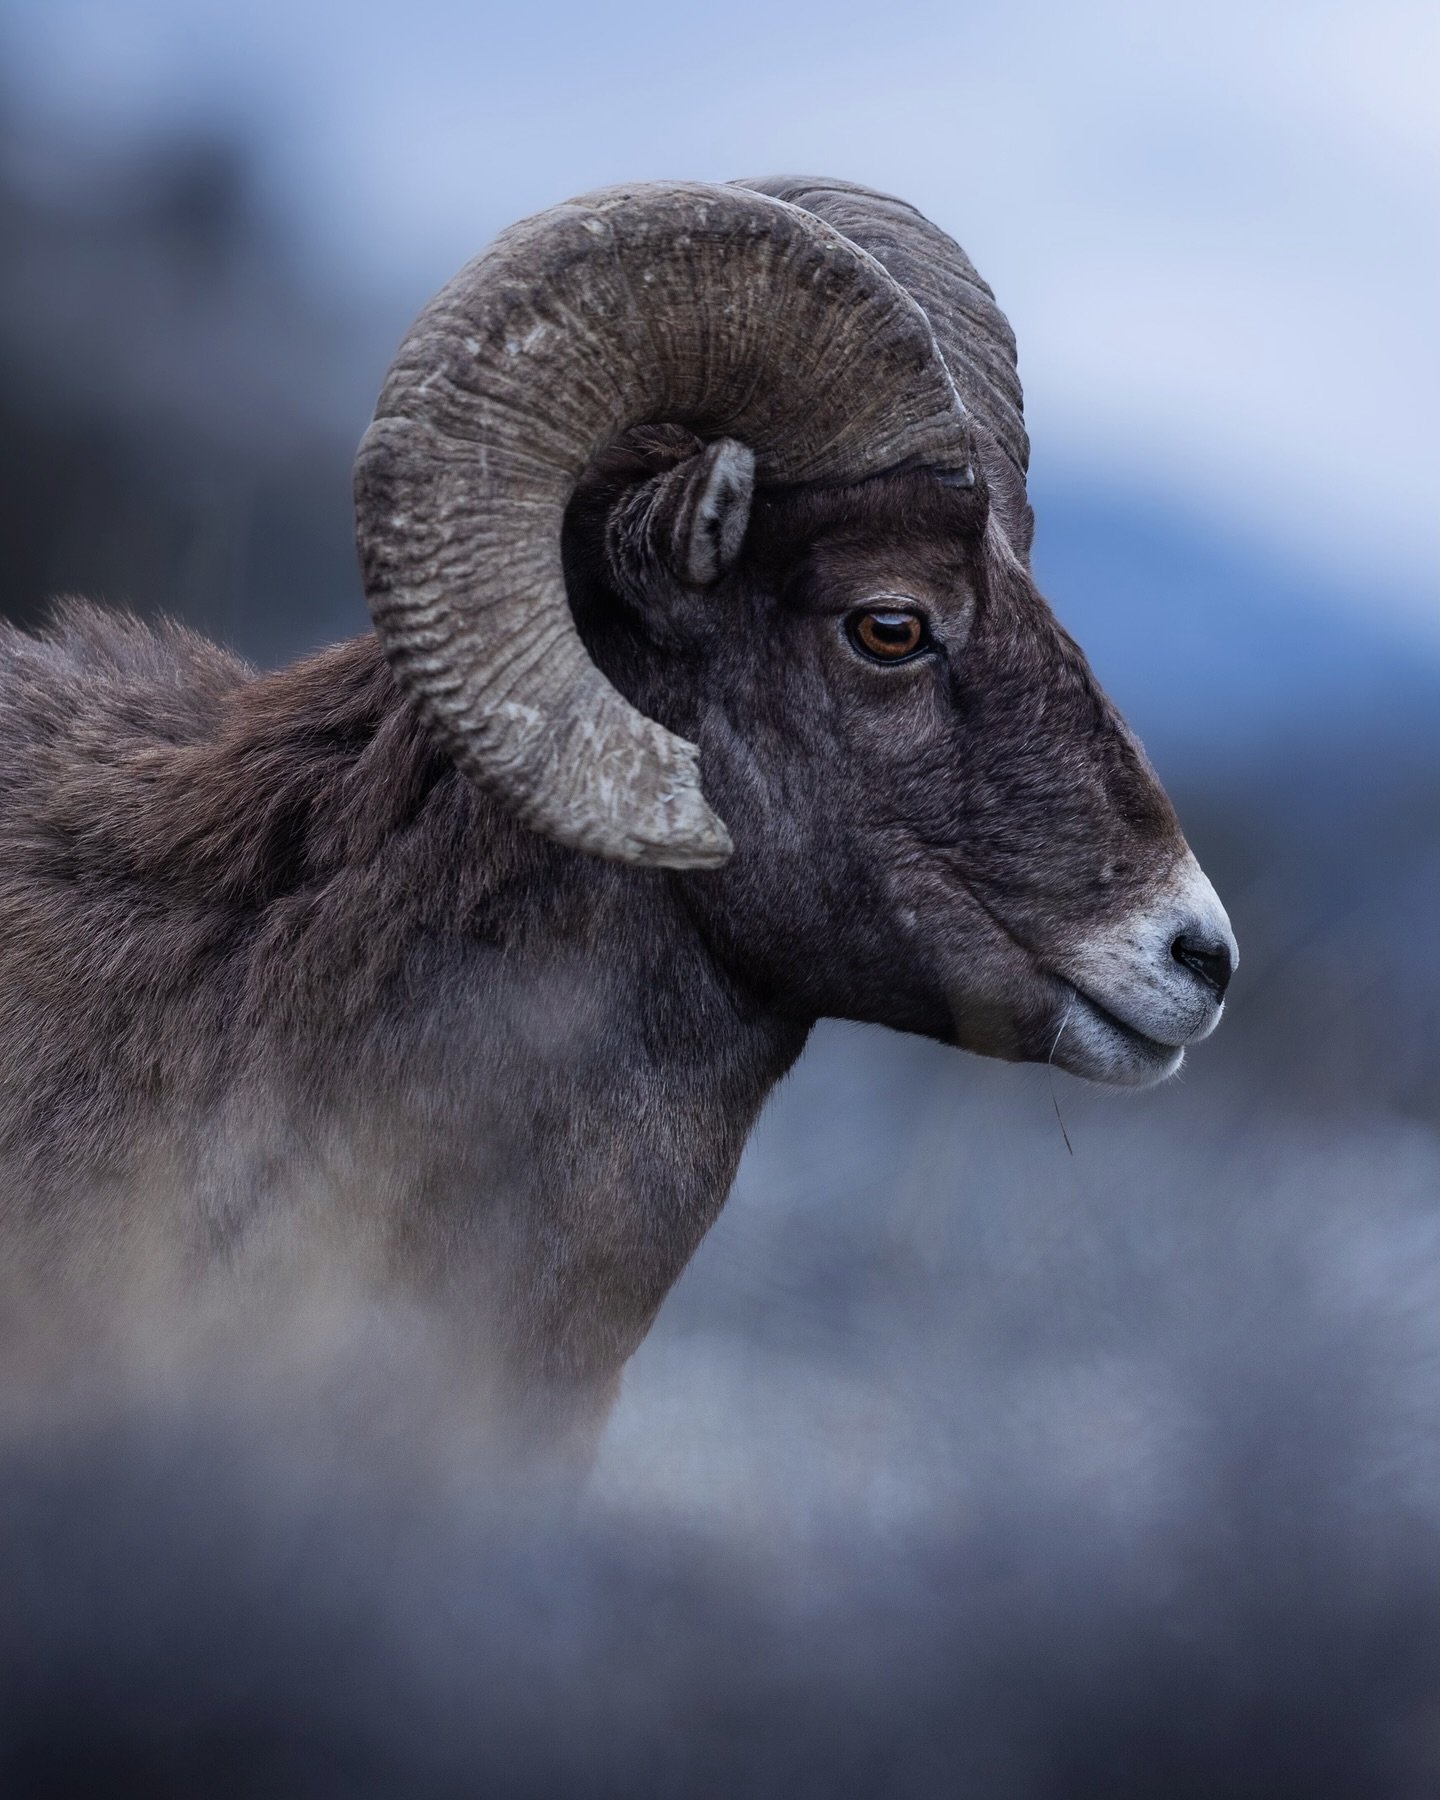 enjoying the last of winter below the mountains

Big horn sheep are the species I photograph the most often during the winter months, though once warmer weather arrives, I see them less frequently as they retreat higher into the mountains. With comin